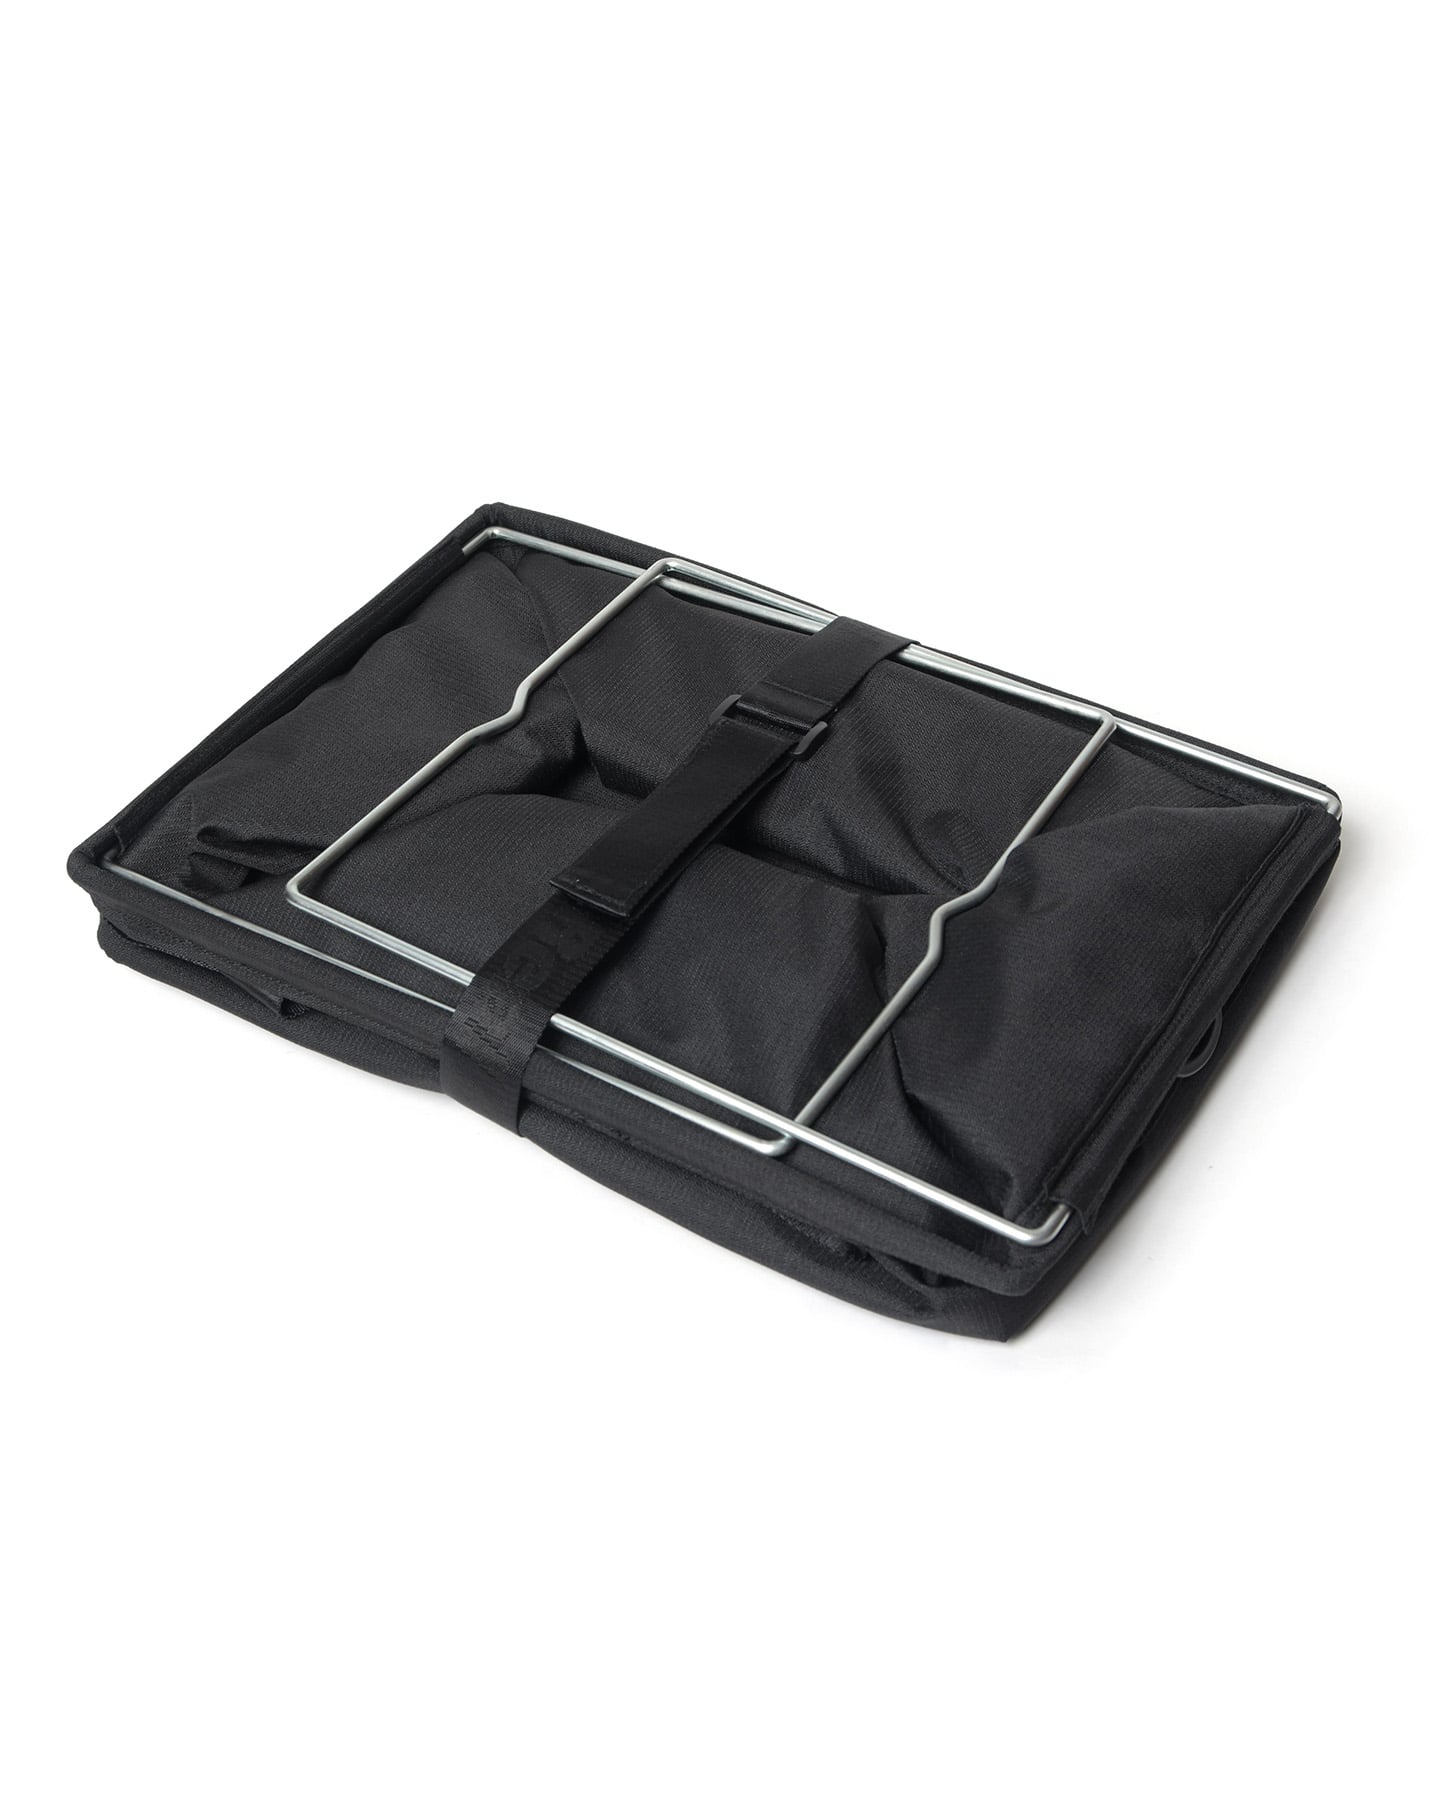 AW23 FCRB FOLDING STORAGE SOFT CONTAINER